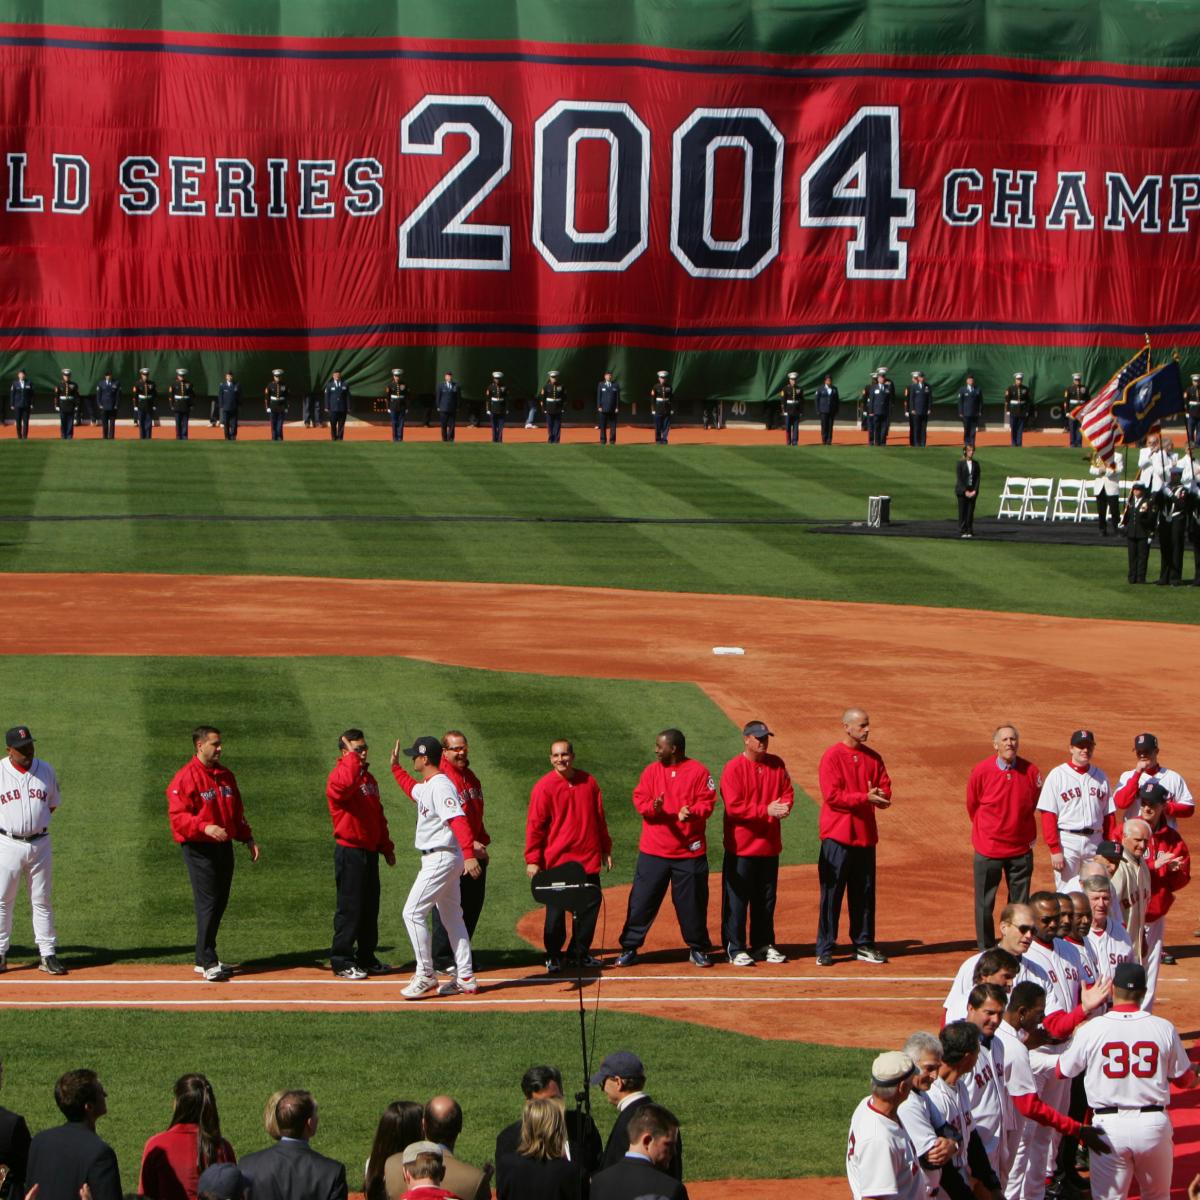 Eighty-Six Years in the Making: the 2004 Boston Red Sox